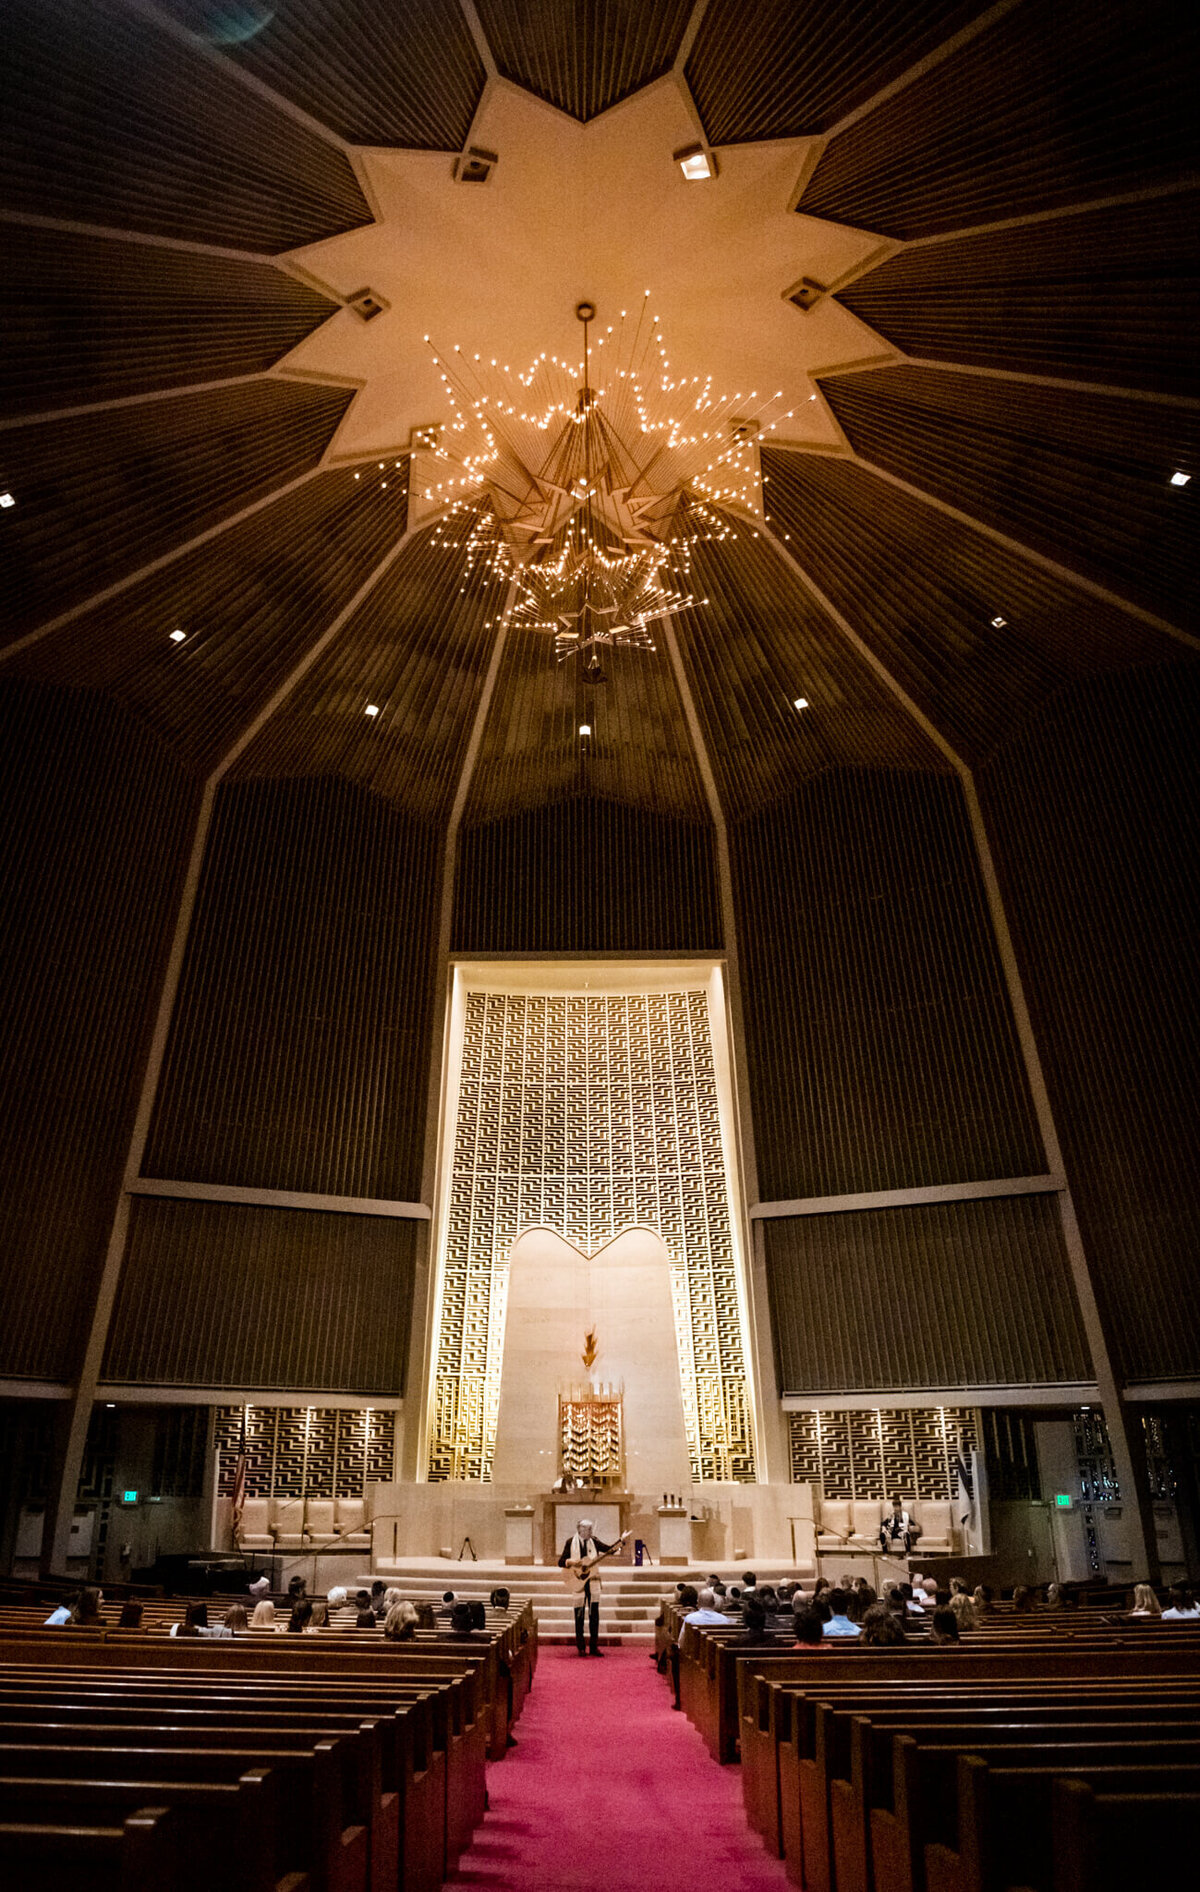 A Bellevue Bar and Bat Mitzvah Photography image of a dark temple during a service